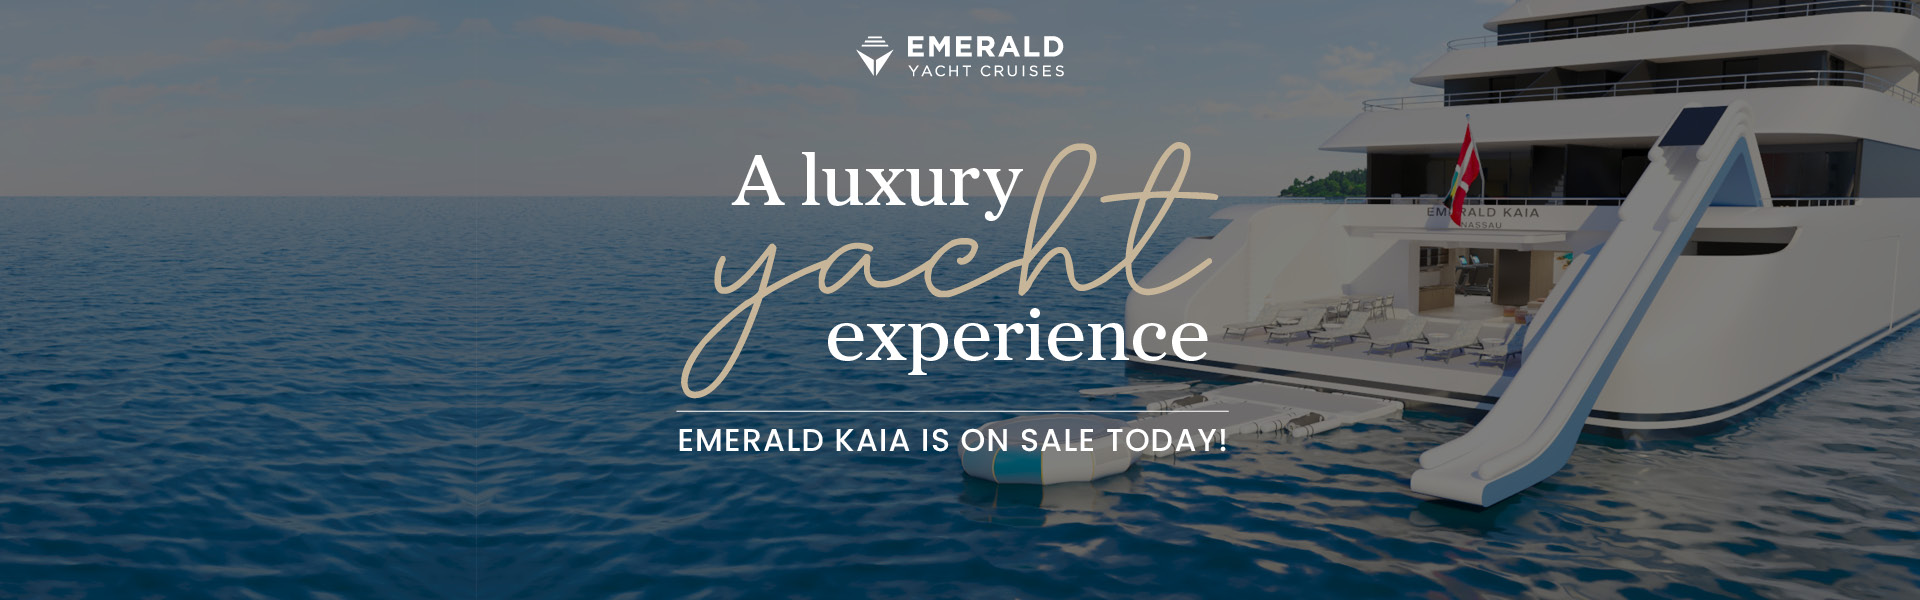 New ship Emerald Kaia on sale now!